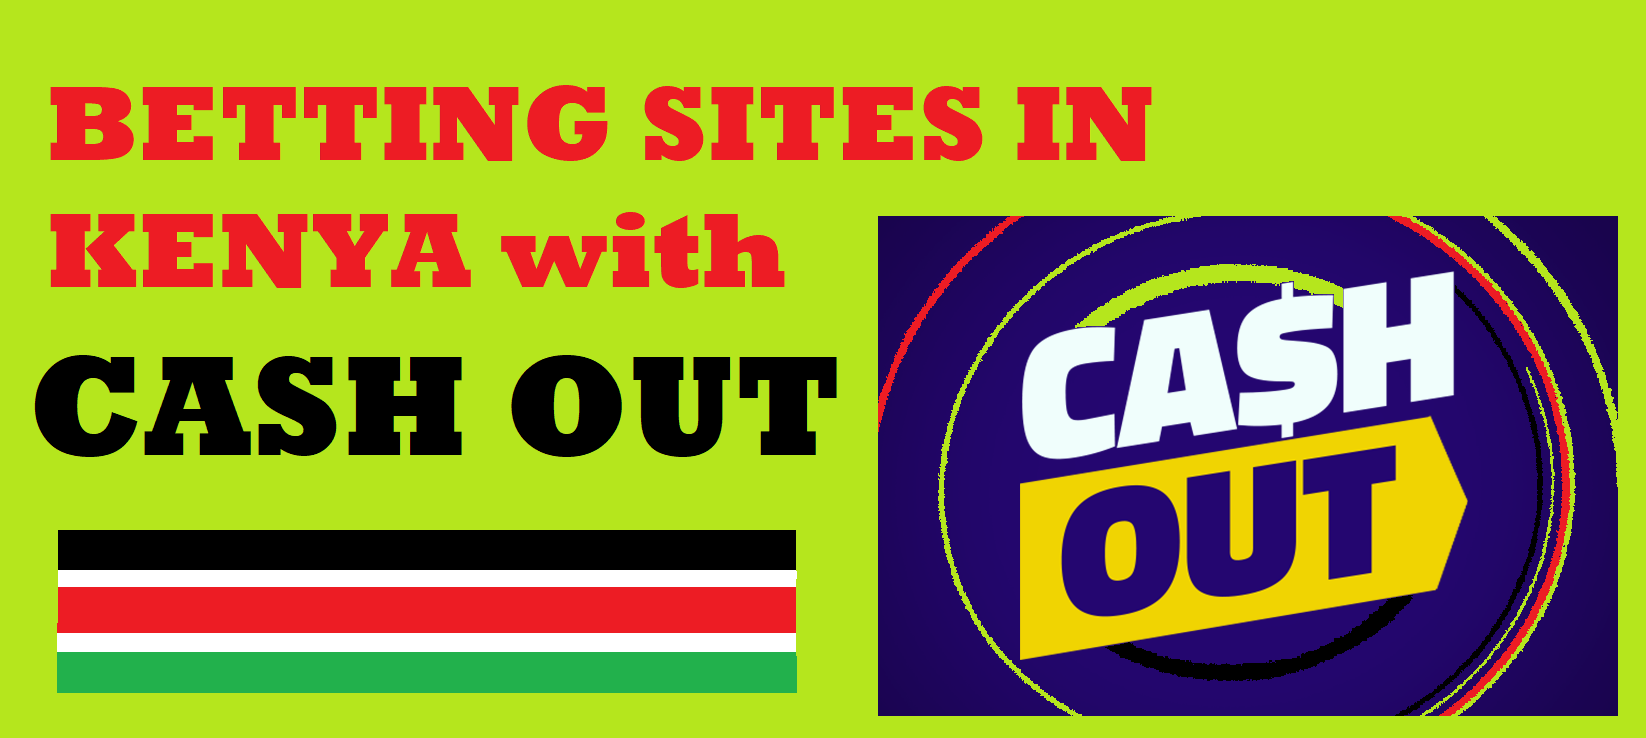 Cach out betting sites in Kenya